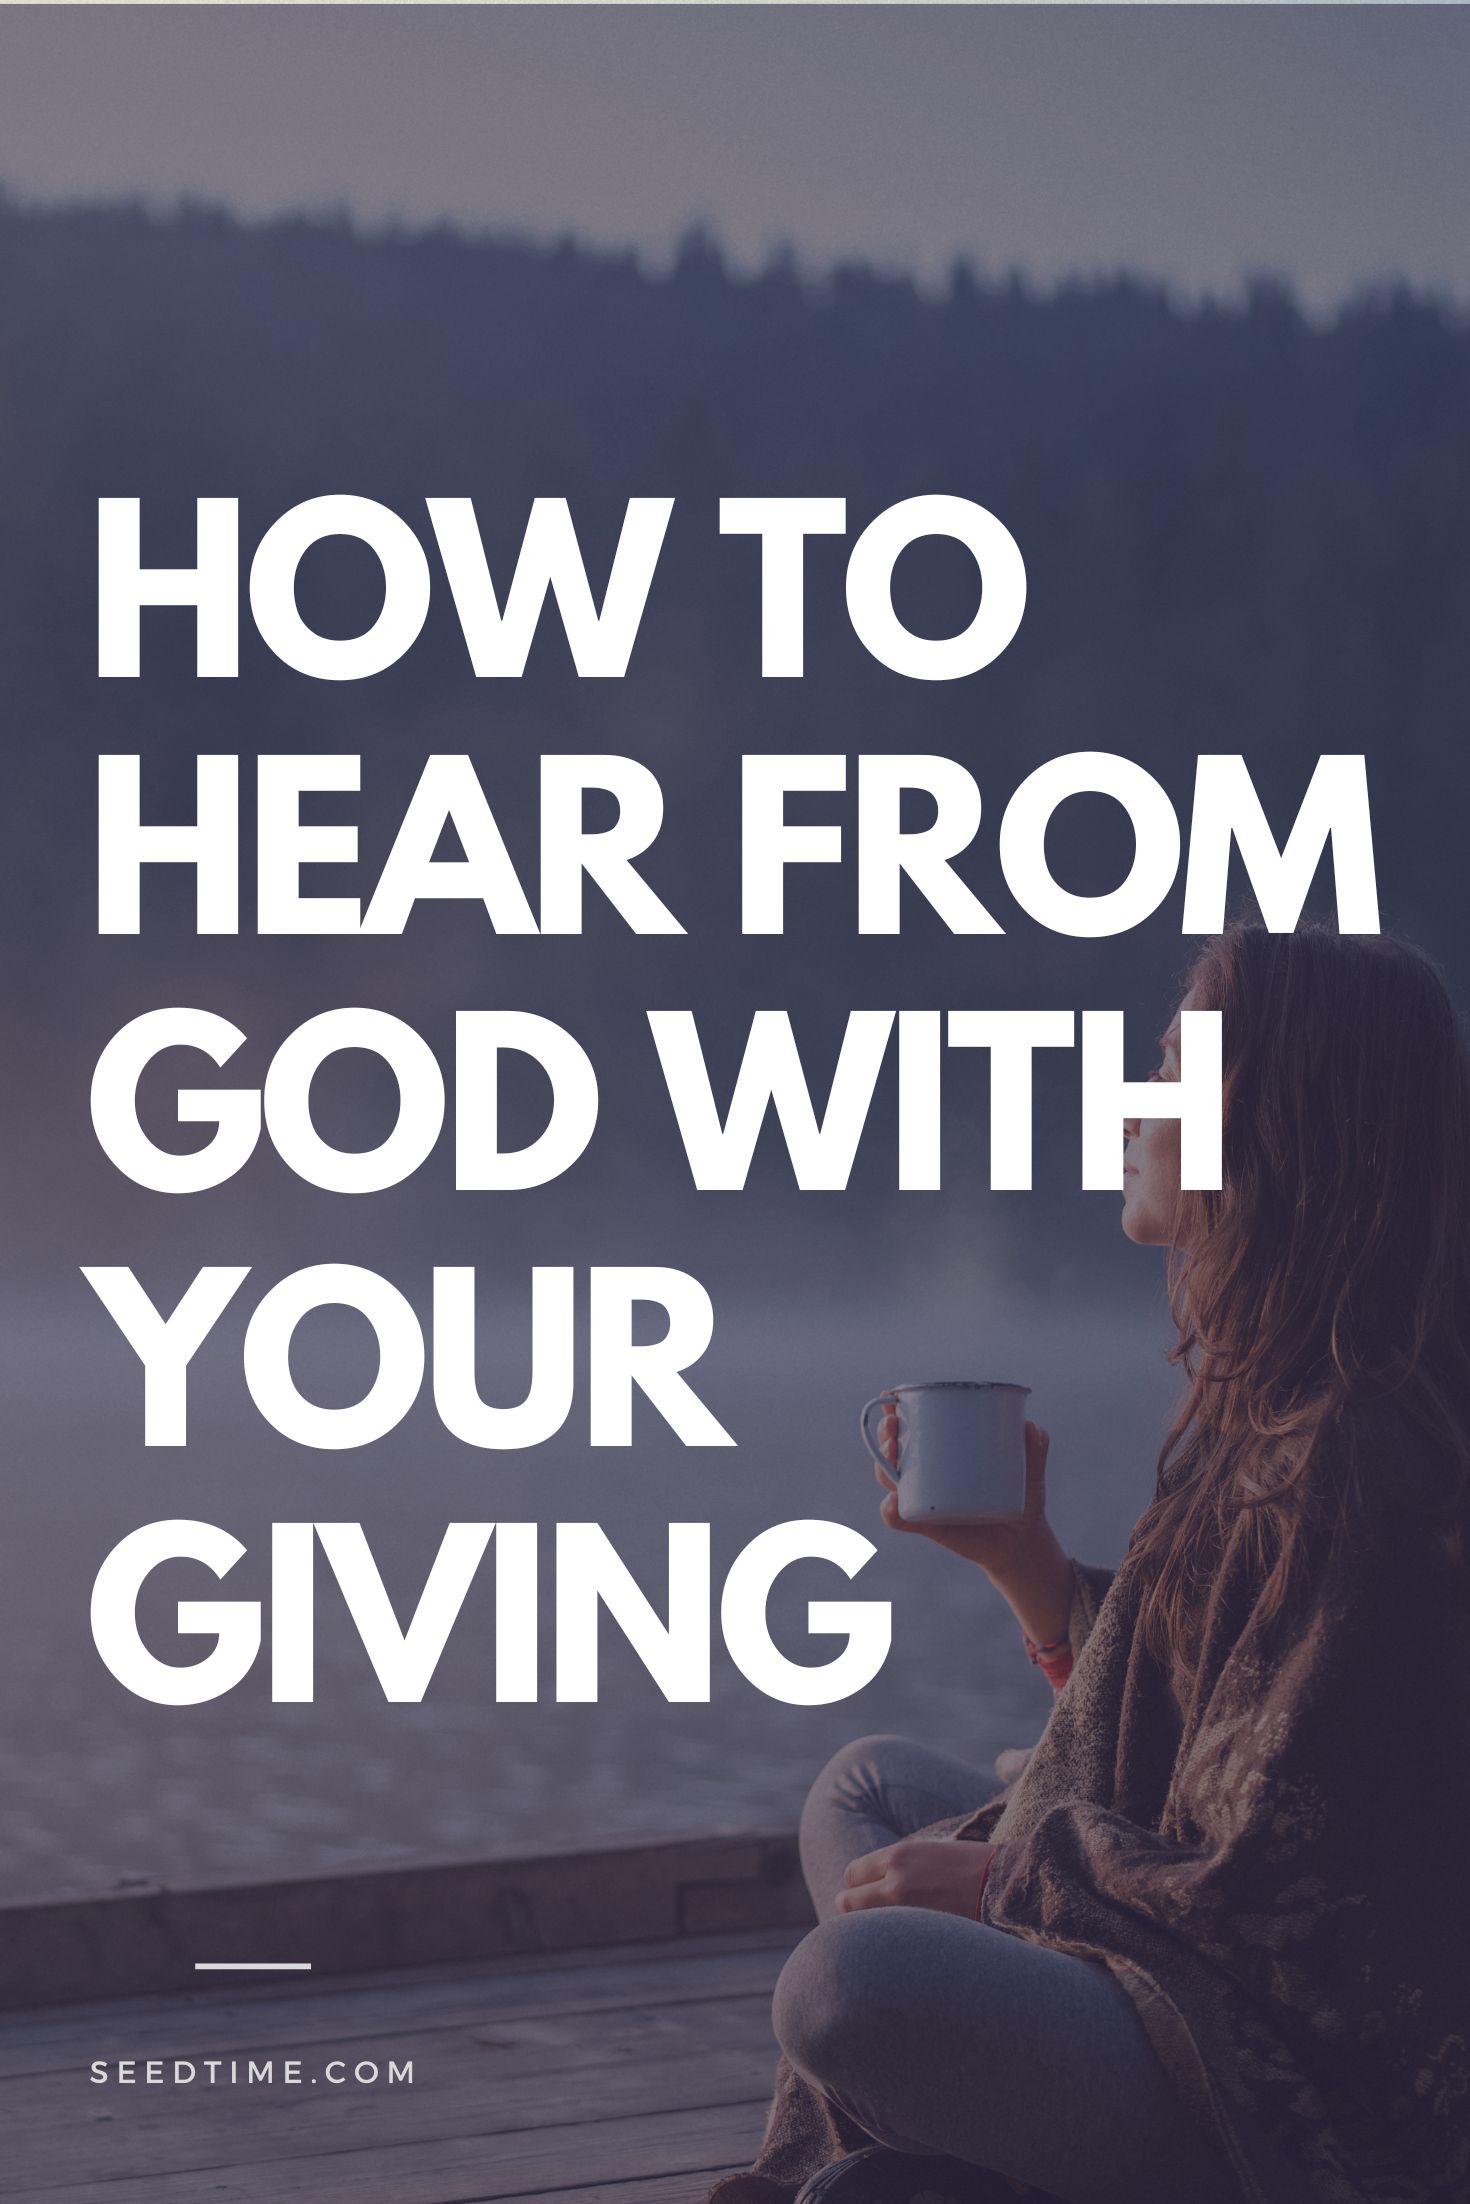 How to hear from God with your giving